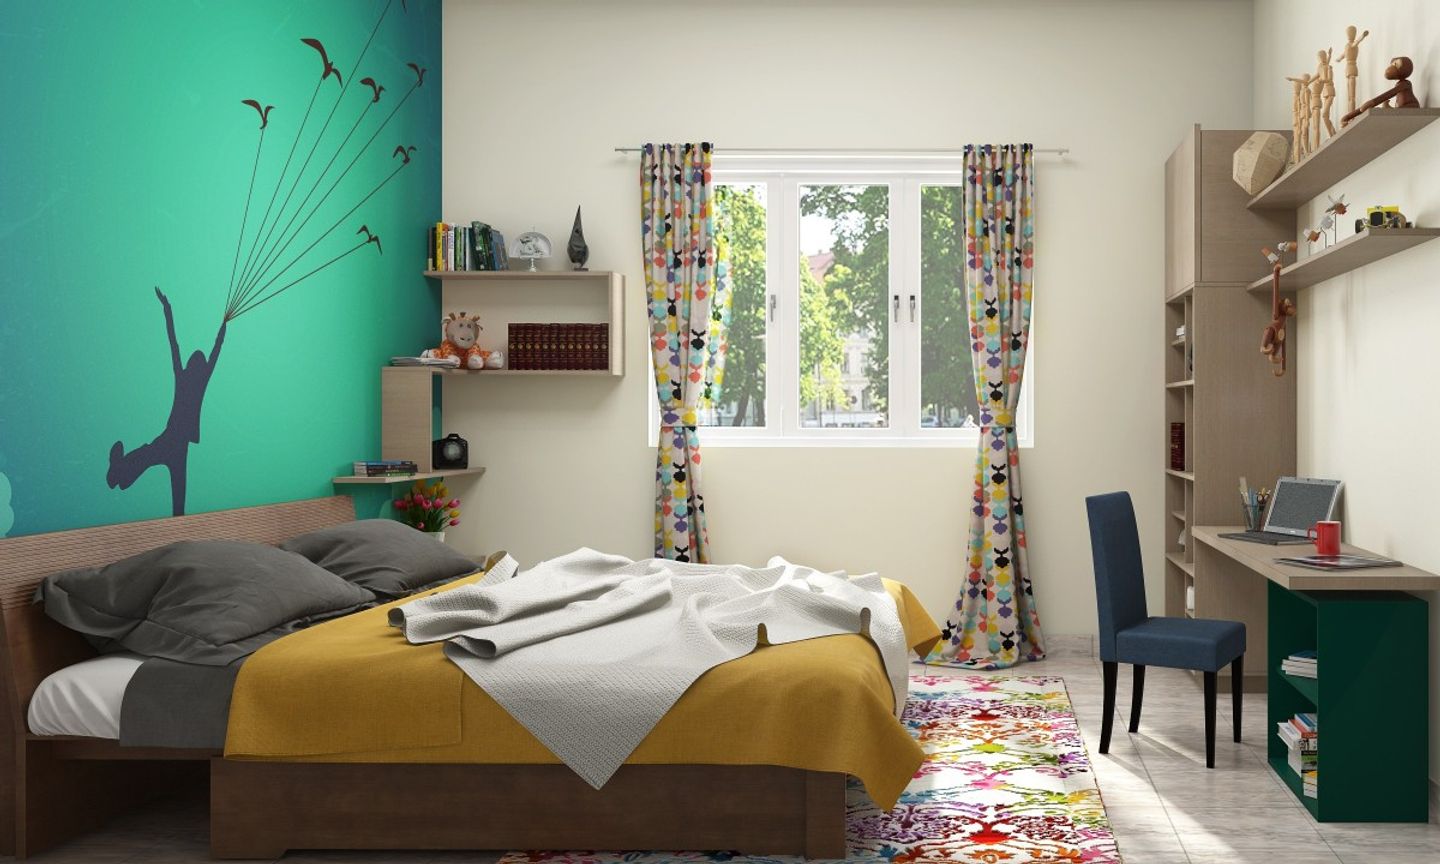 Modern Green And White Kid's Room Design With Wall Design